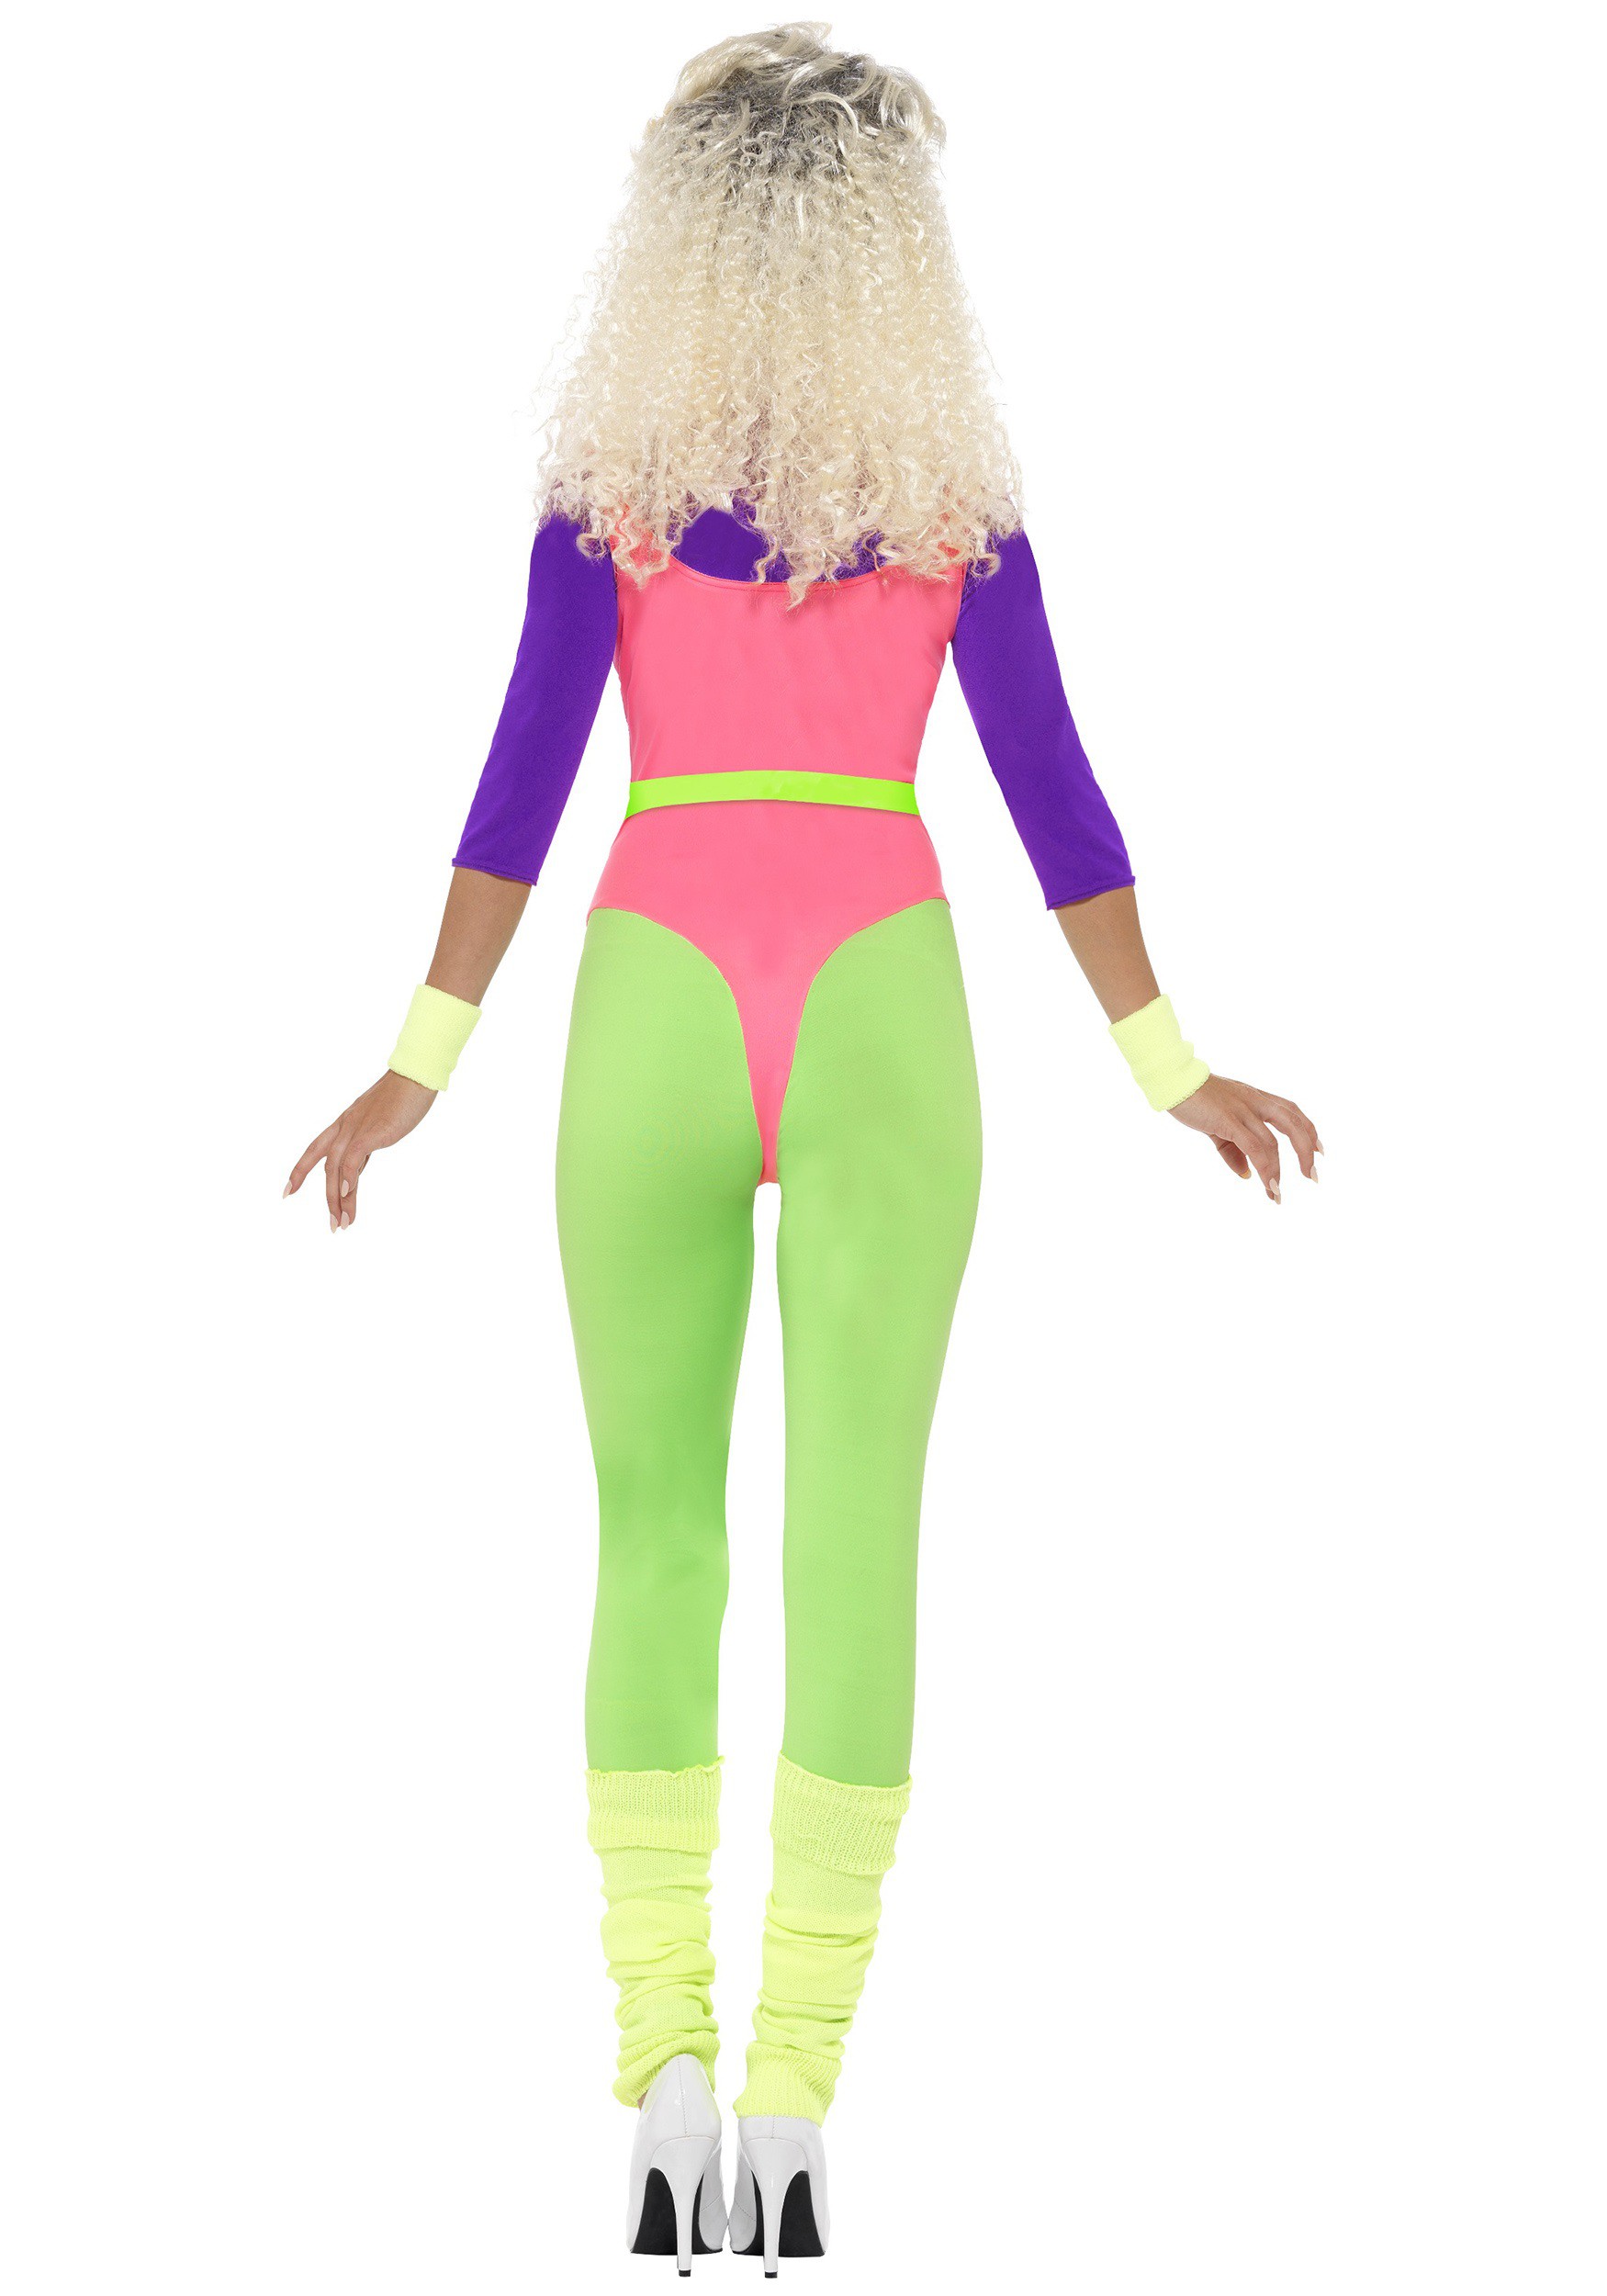 80s Workout Women's Costume